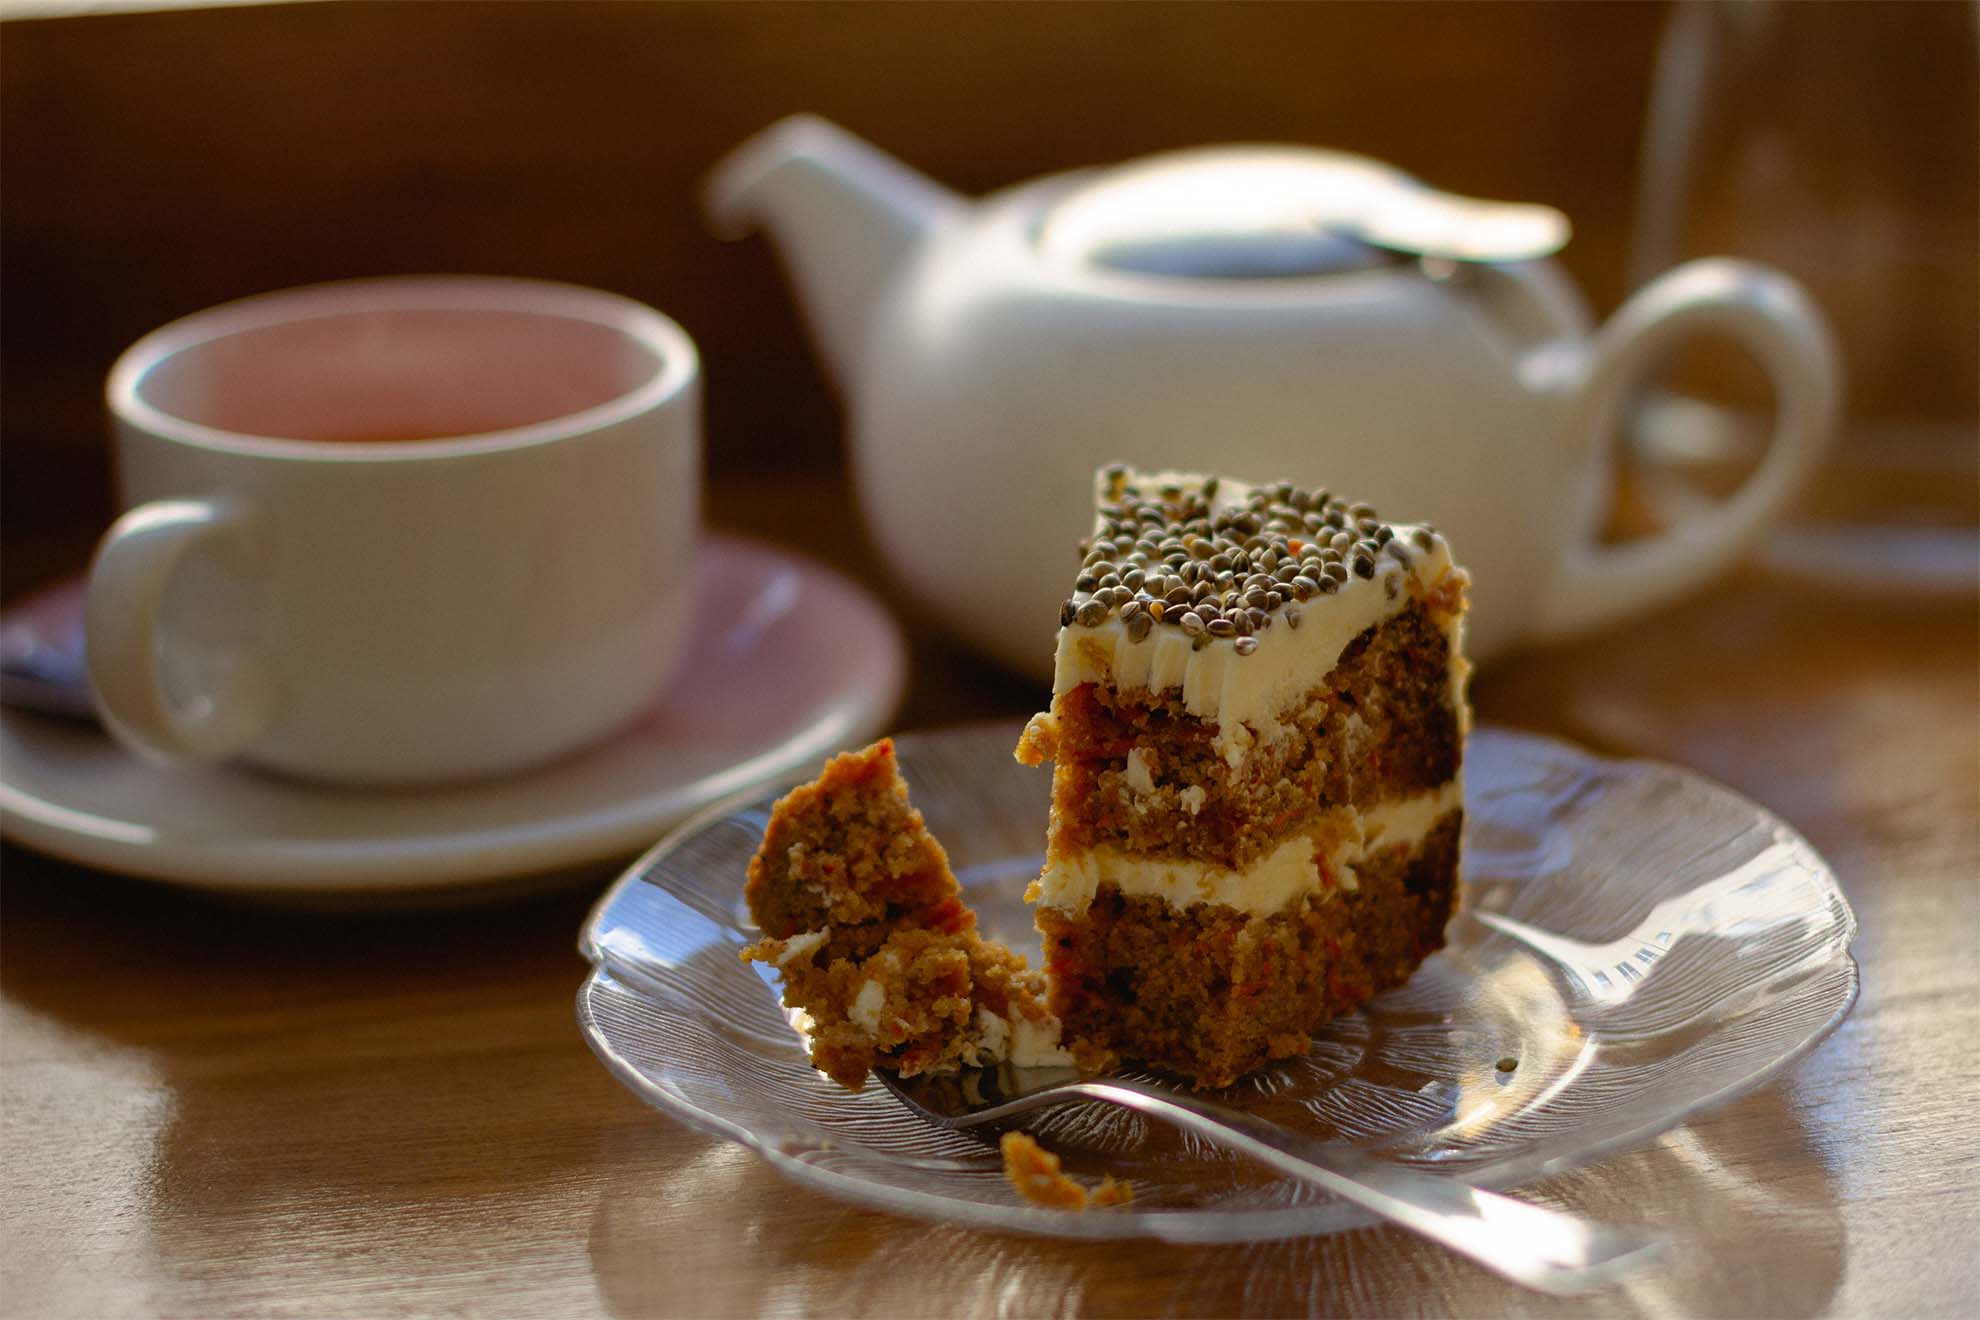 A piece of cake on a plate with a cup of tea